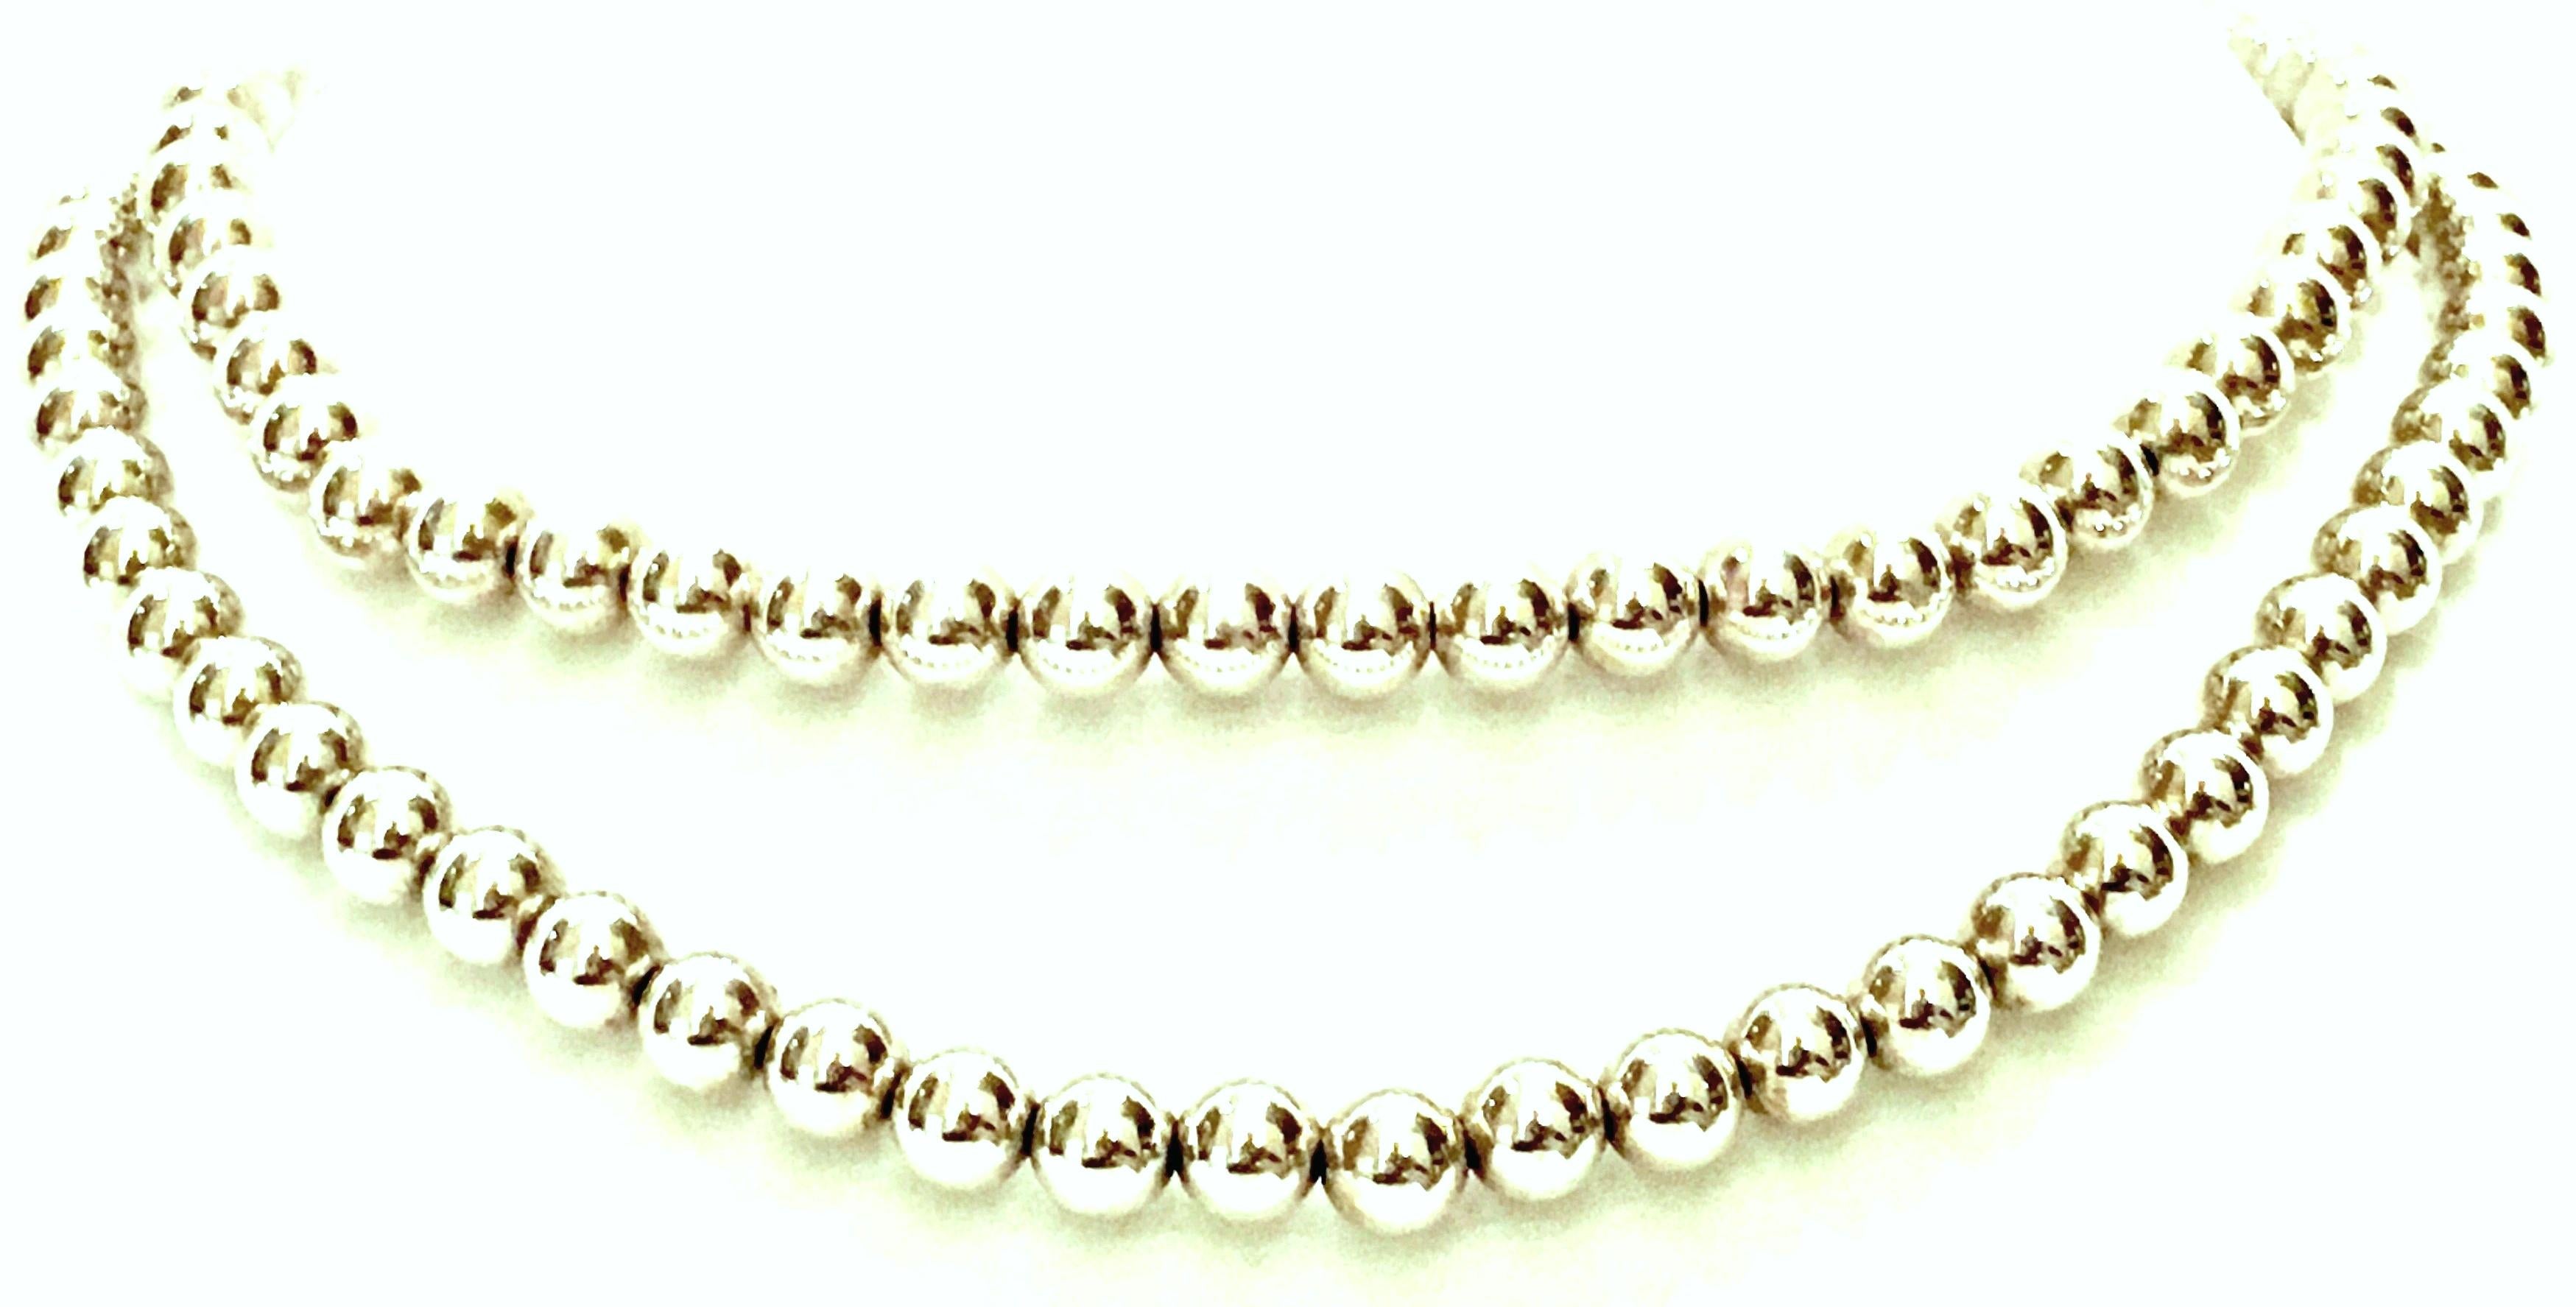 20th Century Classic & Modern Sterling 925 silver bead opera length necklace. Each bead is approximately .25